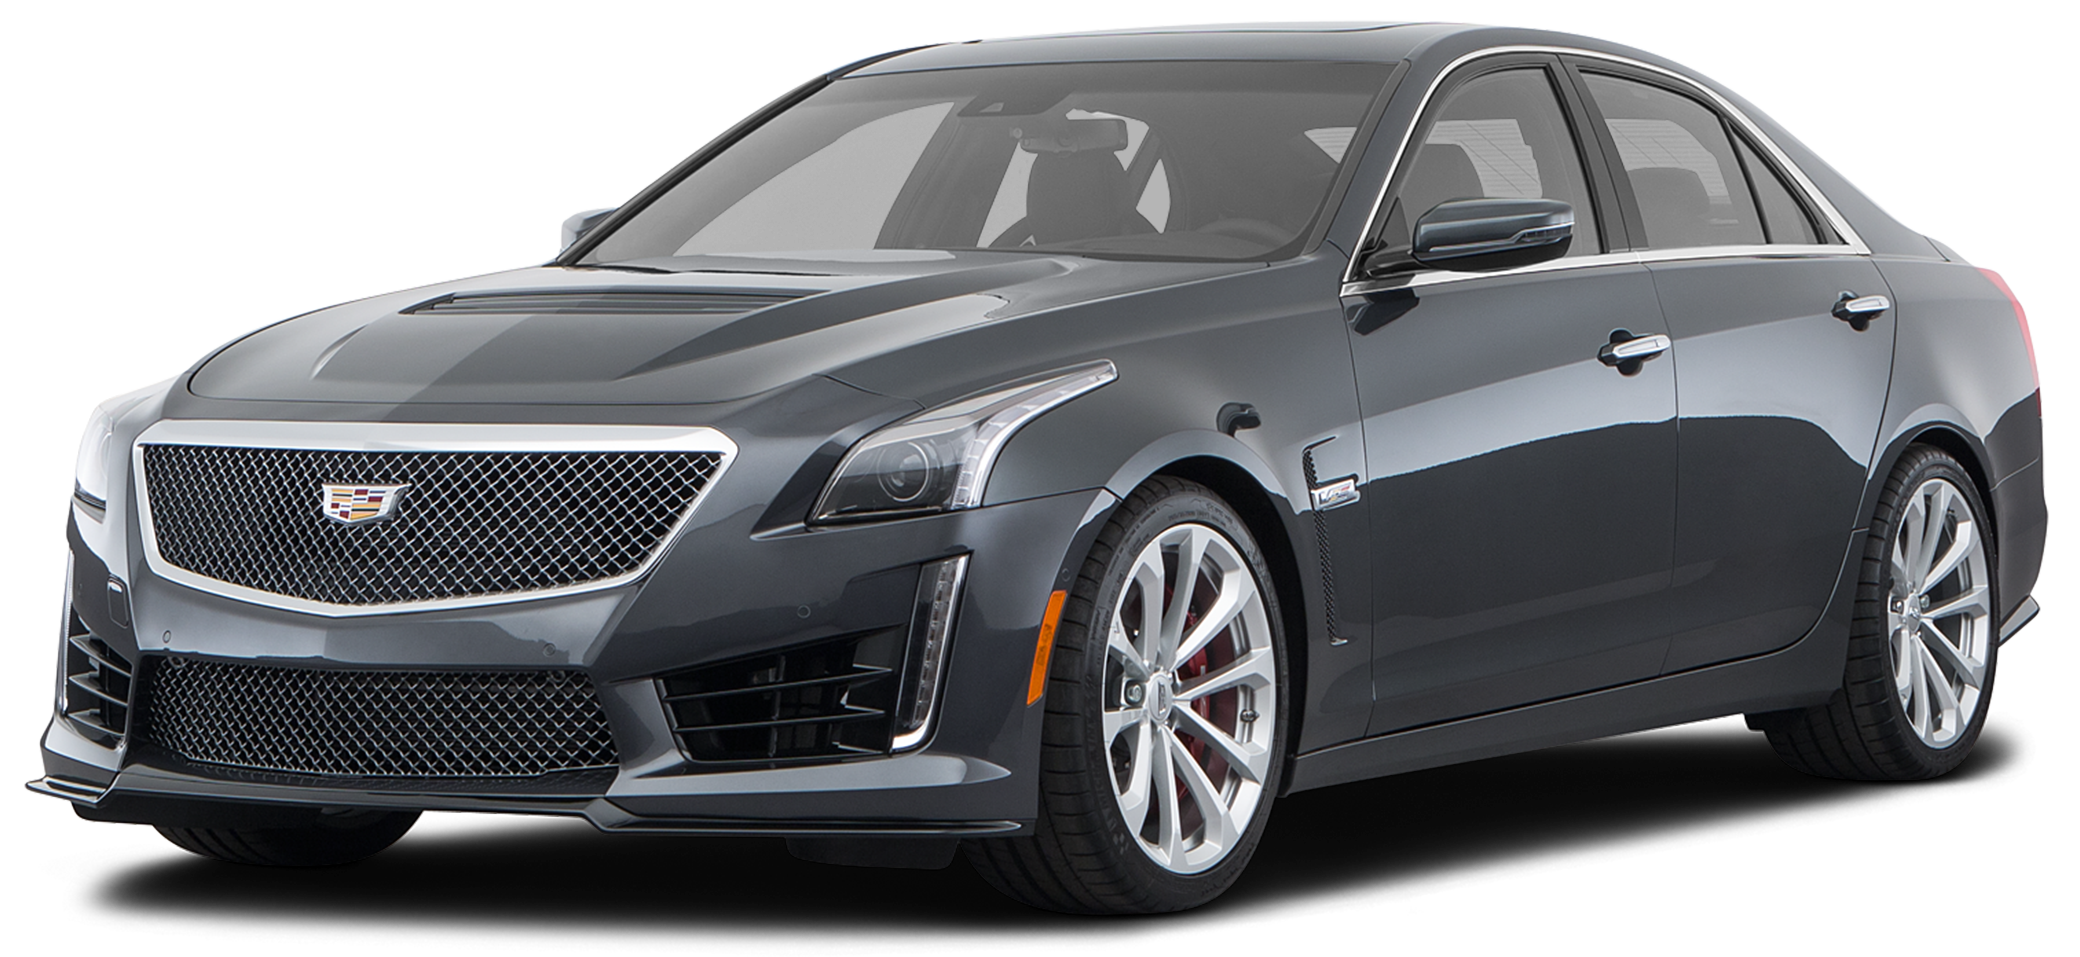 2019 CADILLAC CTS-V Incentives, Specials & Offers in Wilkes-Barre PA